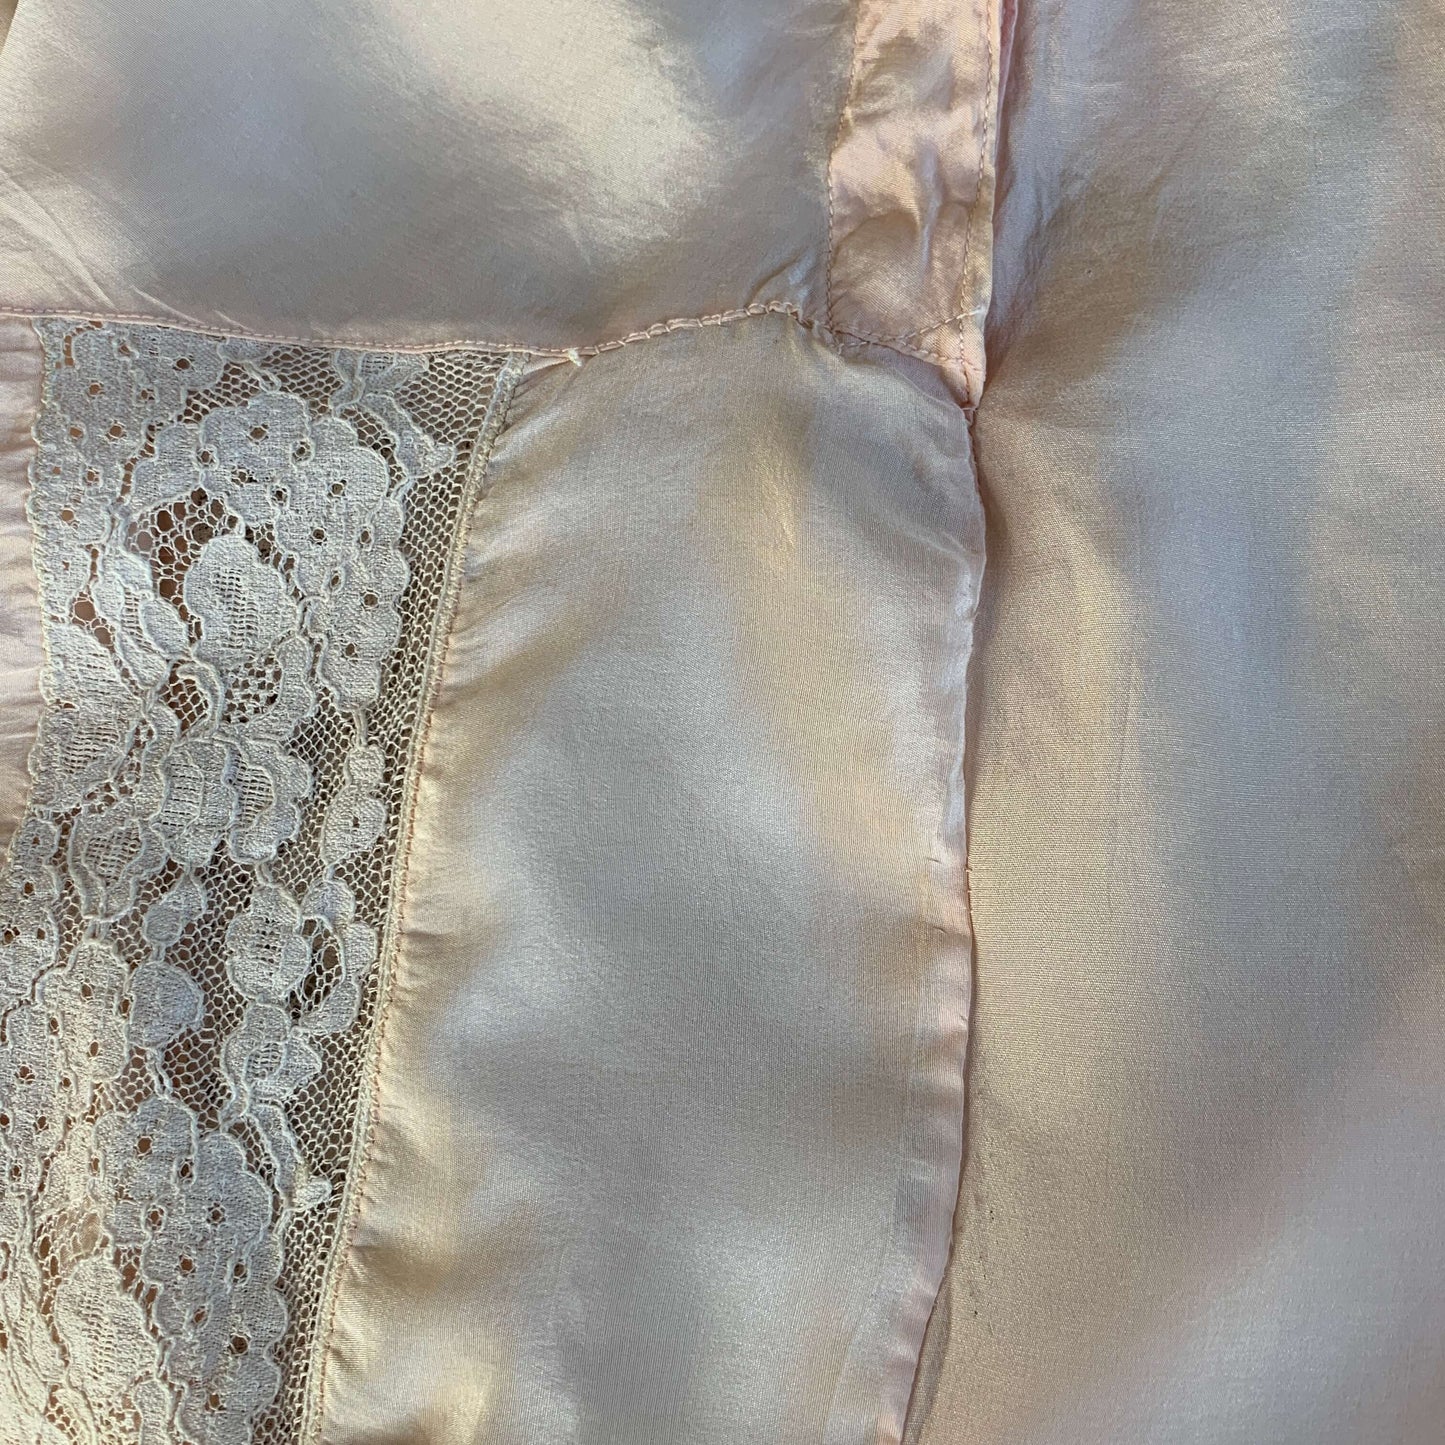 close up showing insertion lace